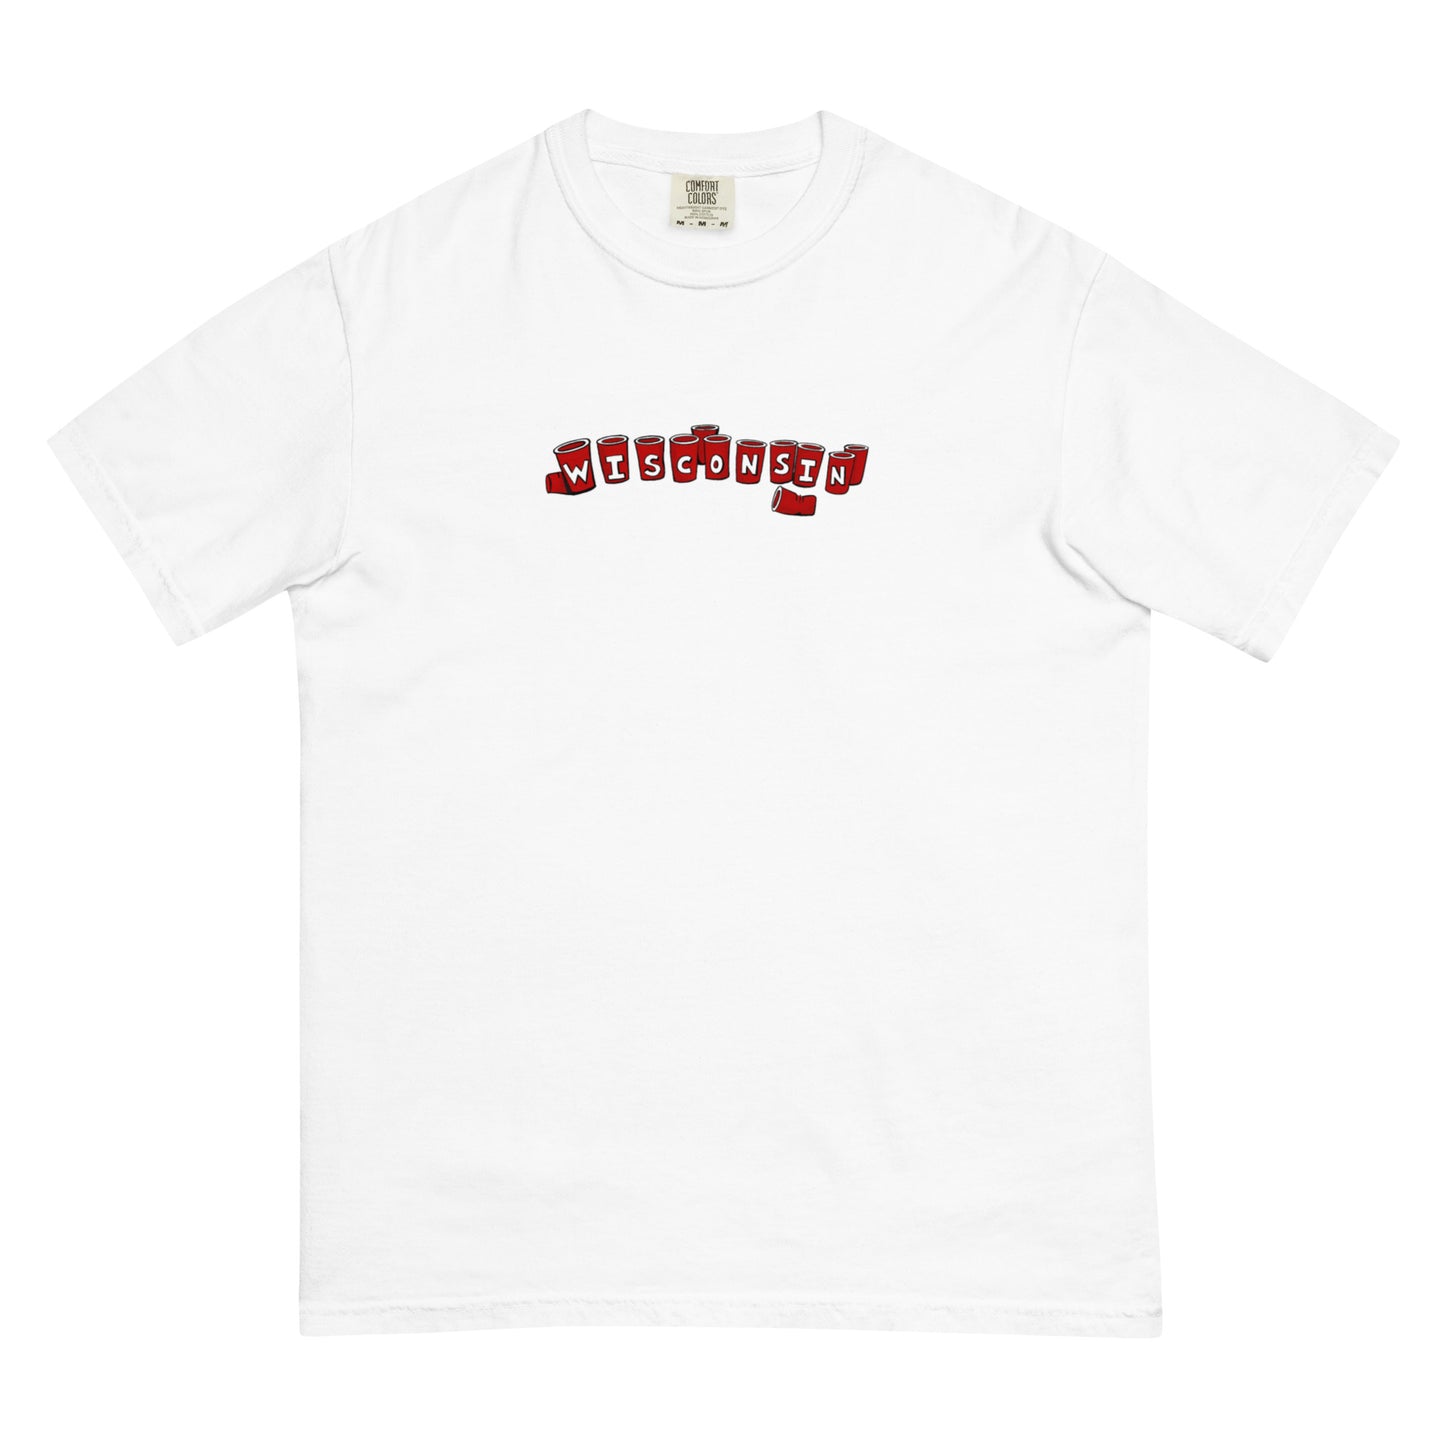 Wisconsin Solo Cup Tee